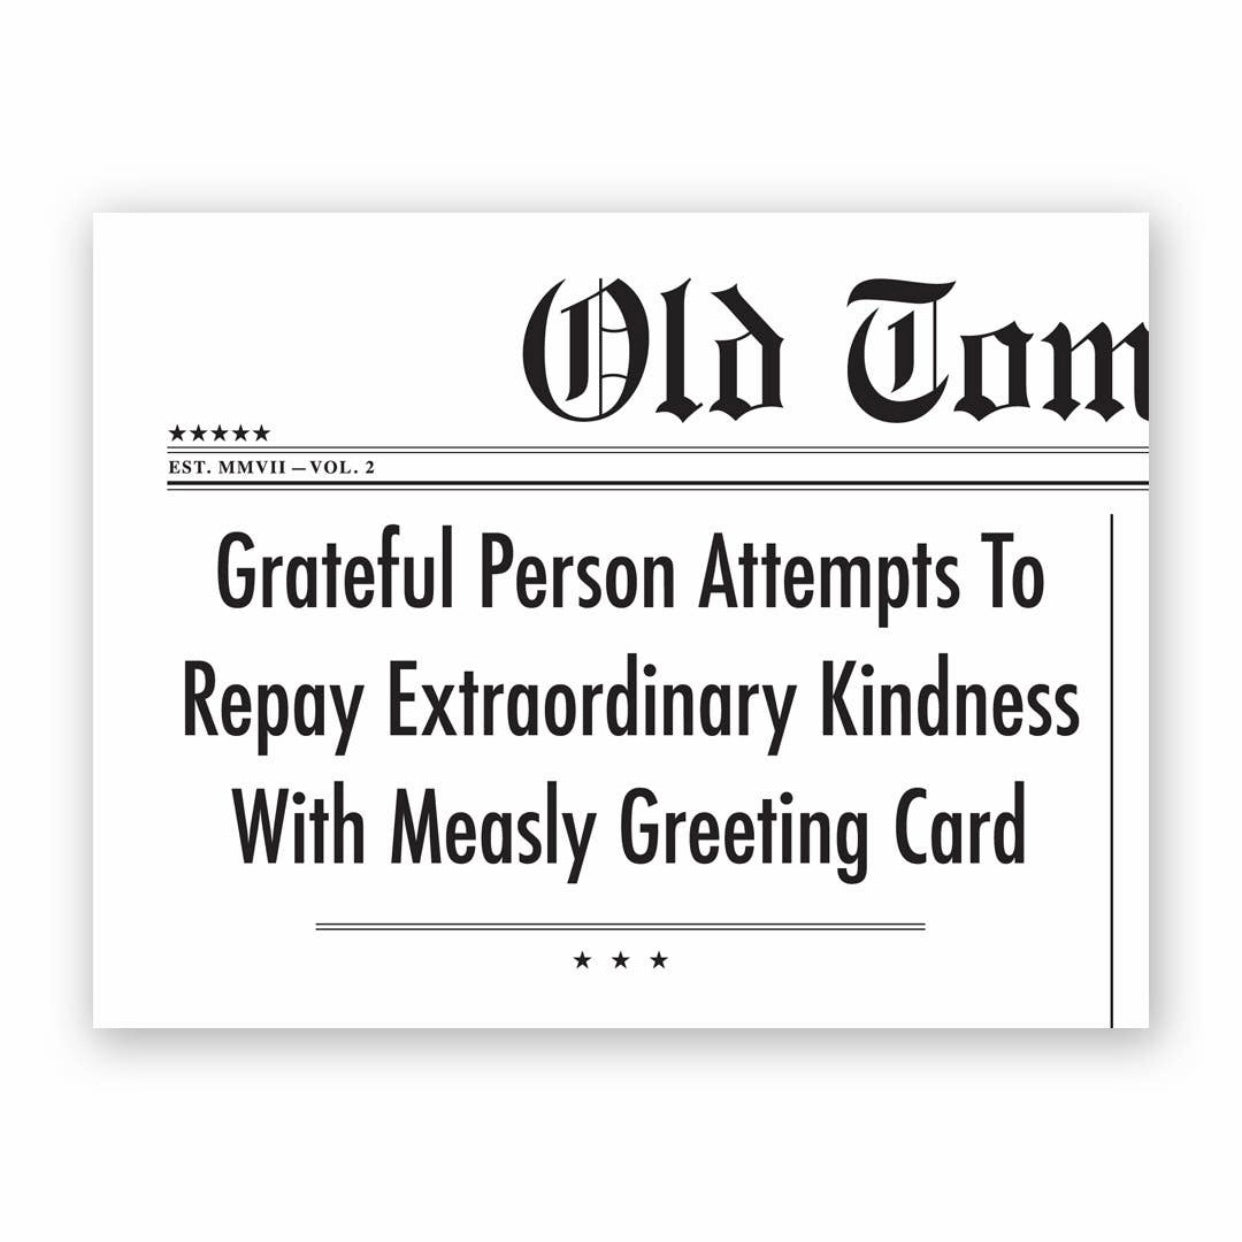 Grateful person attents to repay greeting card